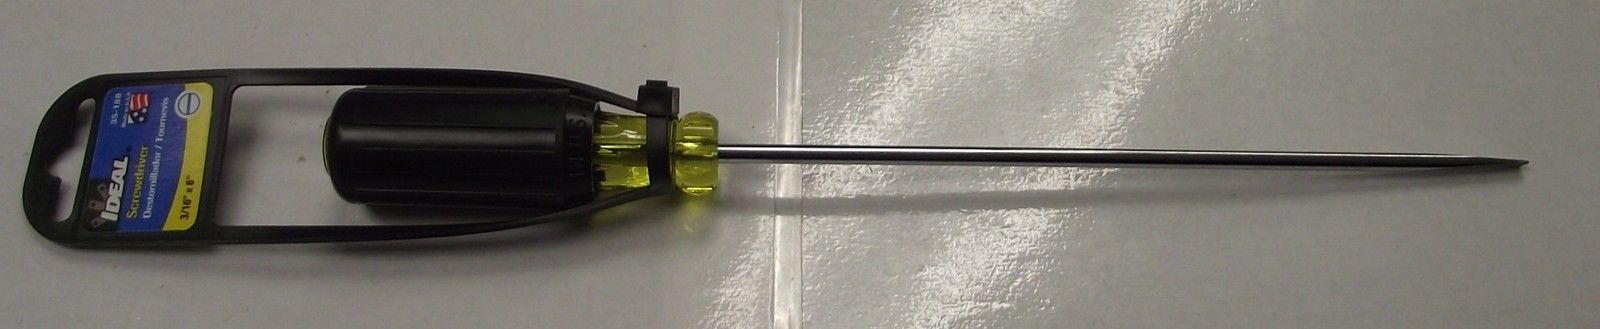 IDEAL 35-188 Electricians Cabinet Tip 3/16" x 8" x 11-3/4" Screwdriver USA